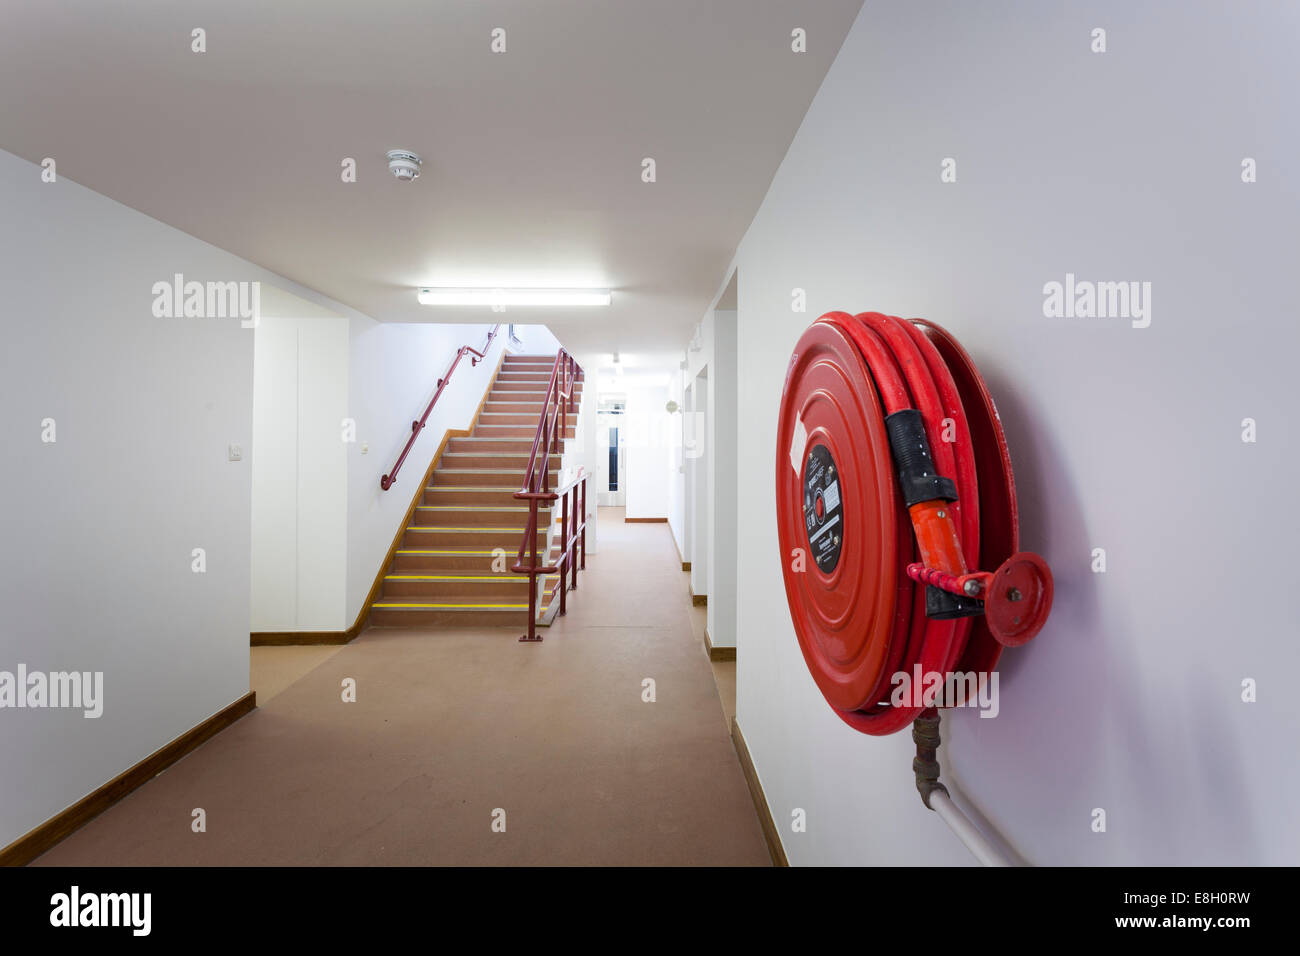 Fire hose on wall inside building by staircase. Stock Photo